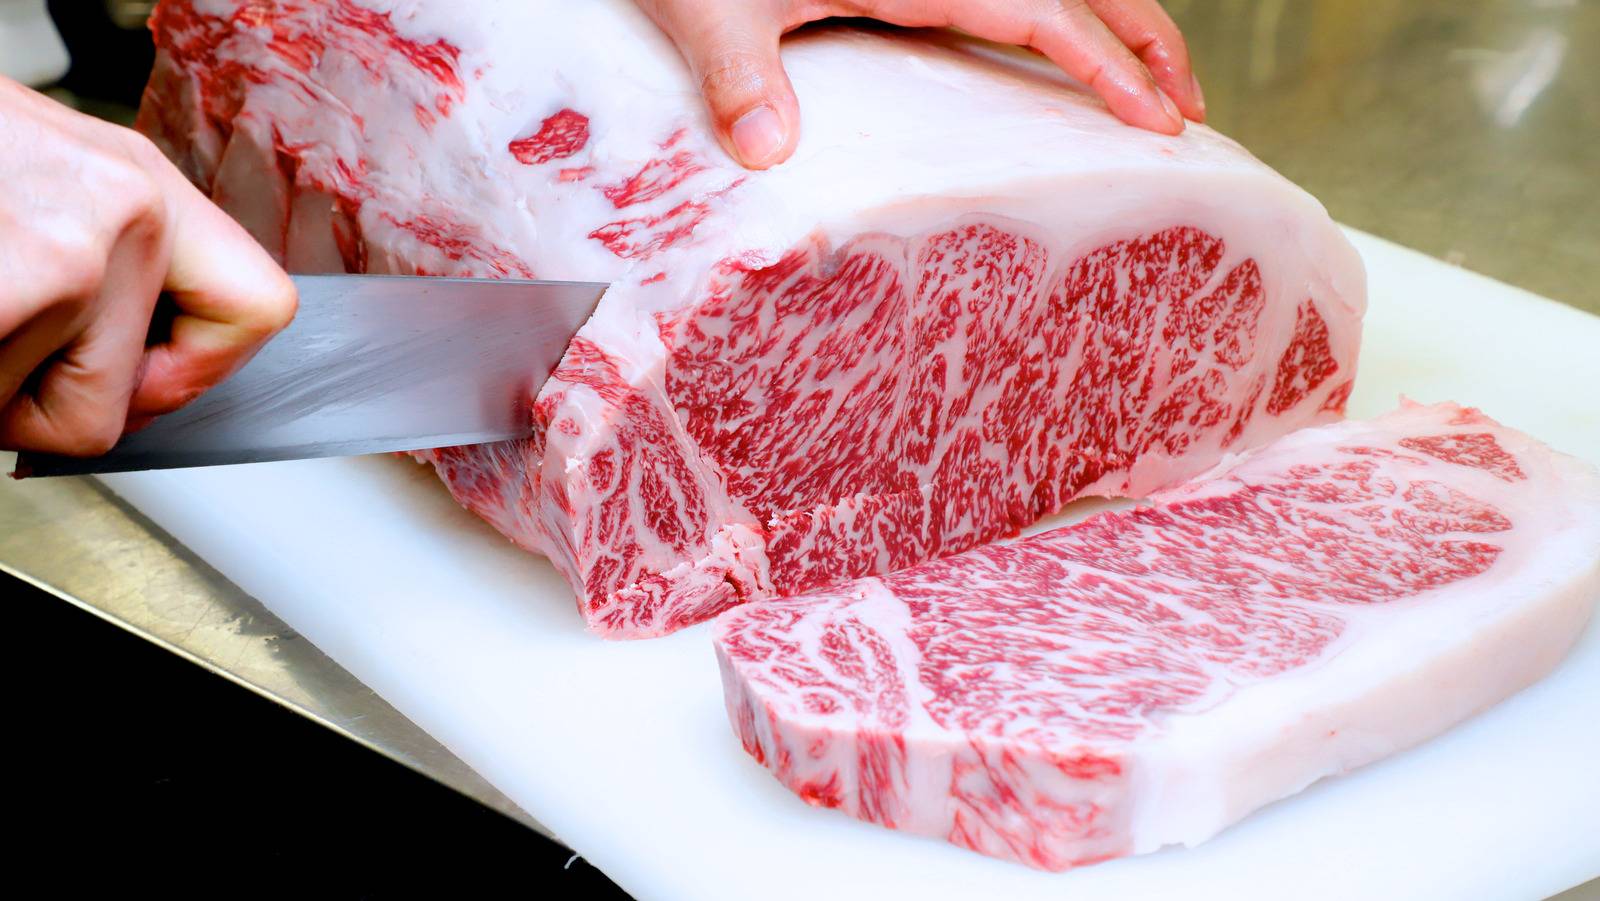 Kobe beef being cut with a sharp knife